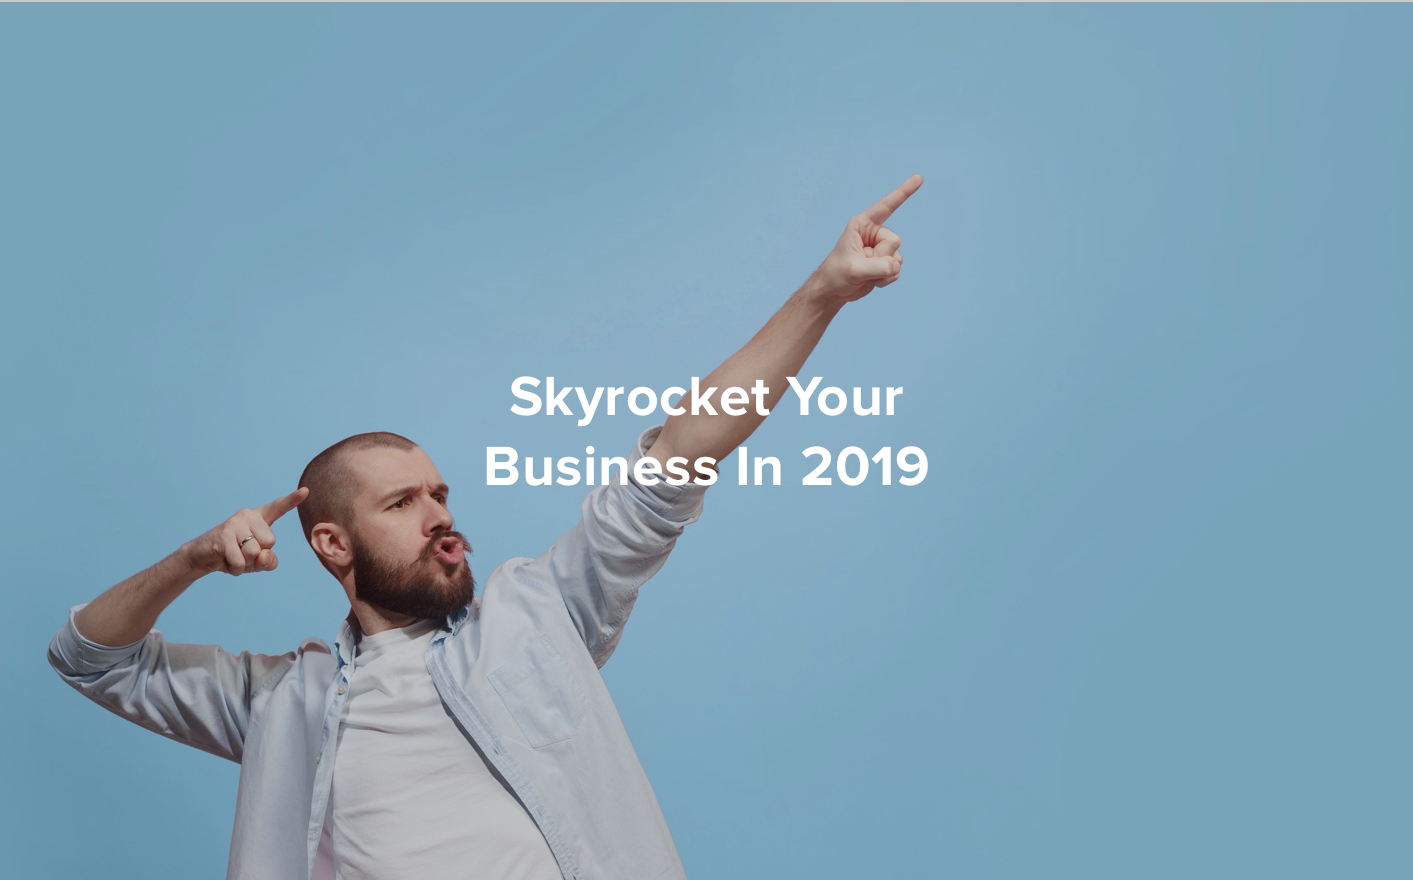 How to Skyrocket Your Business